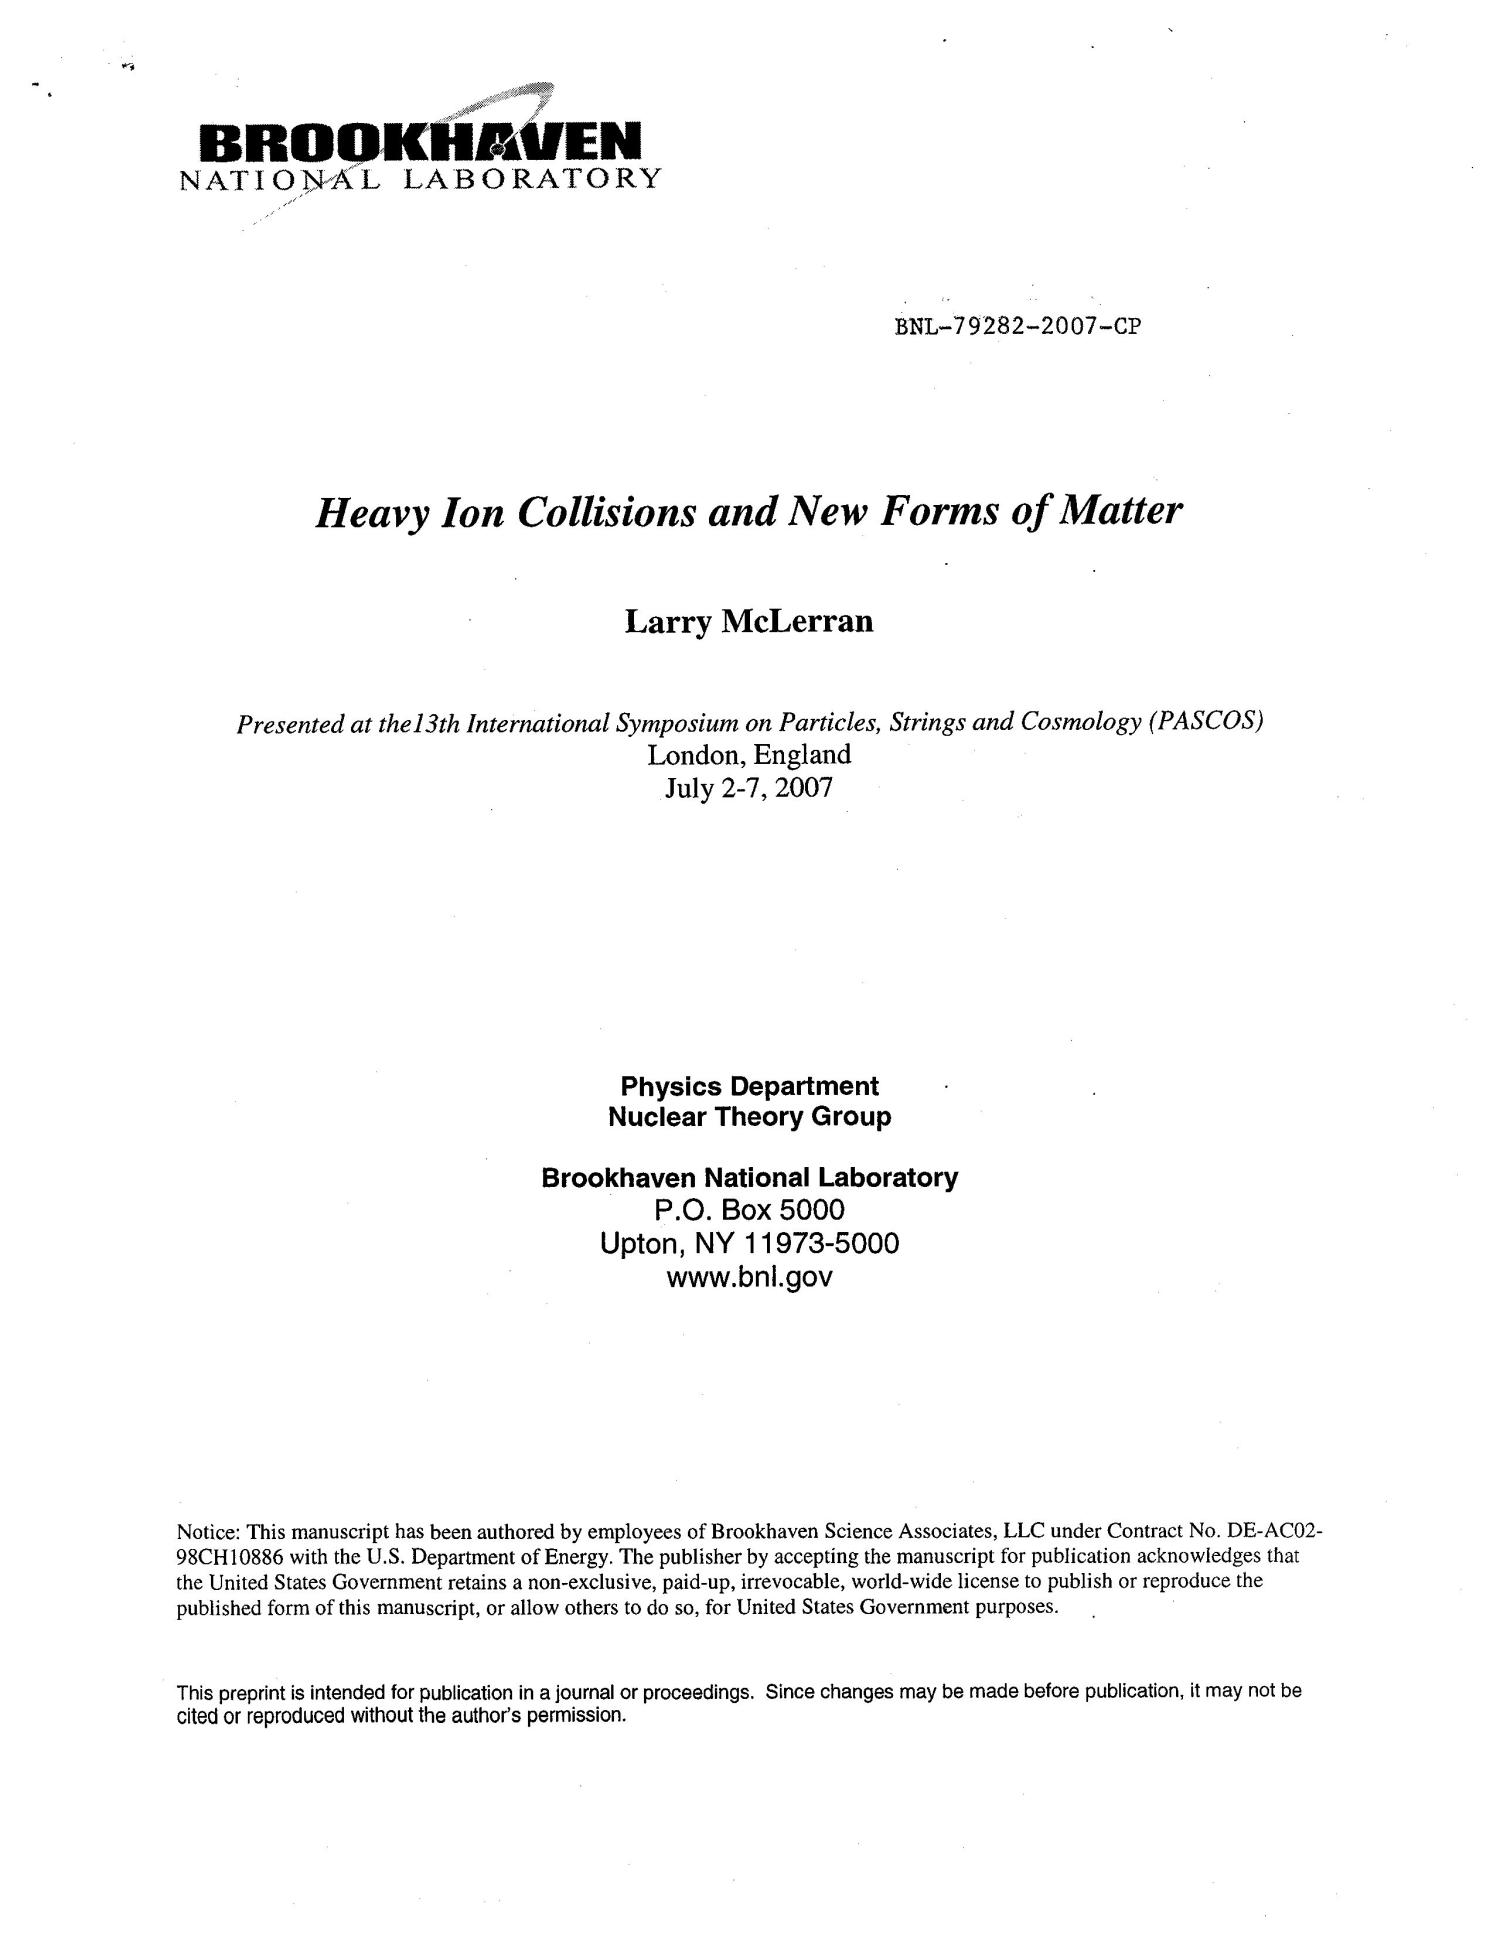 HEAVY ION COLLISIONS AND NEW FORMS OF MATTER
                                                
                                                    [Sequence #]: 1 of 9
                                                